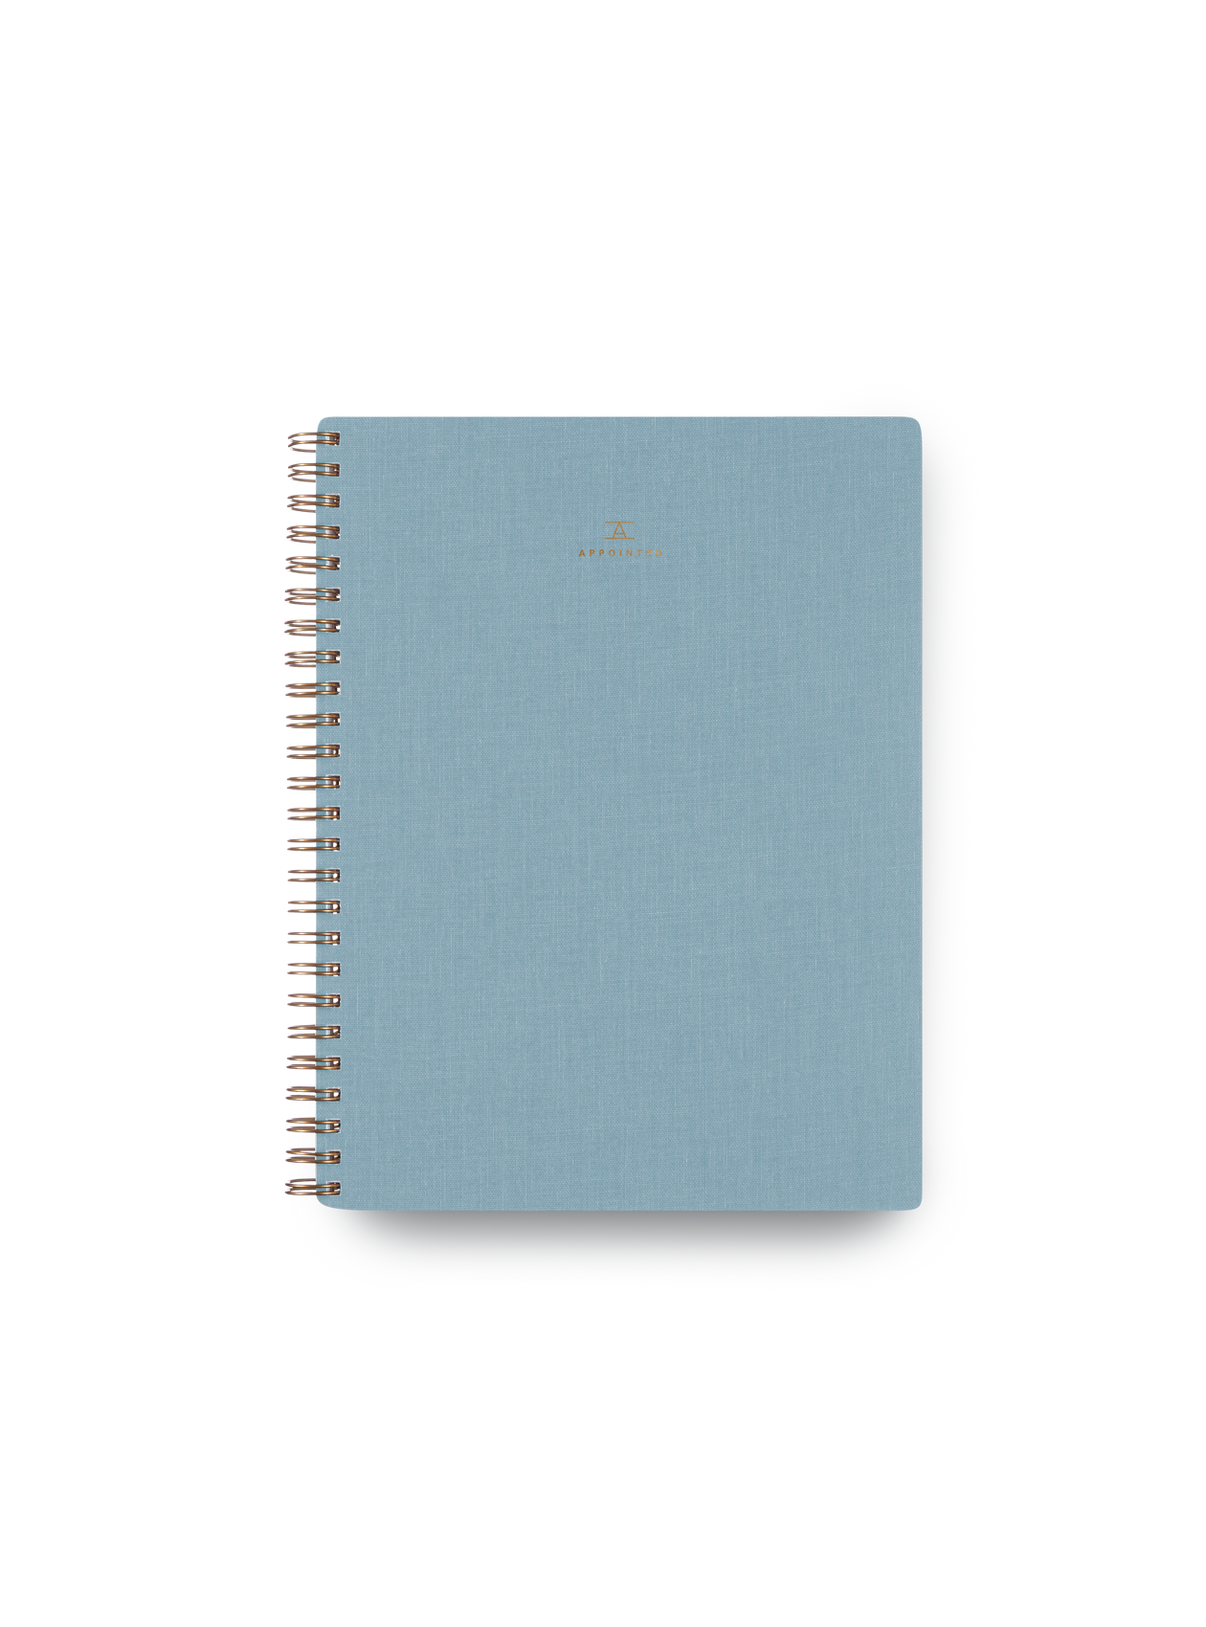 Appointed Dot Grid Workbook in Chambray Blue bookcloth with brass wire-o binding front cover || Chambray Blue